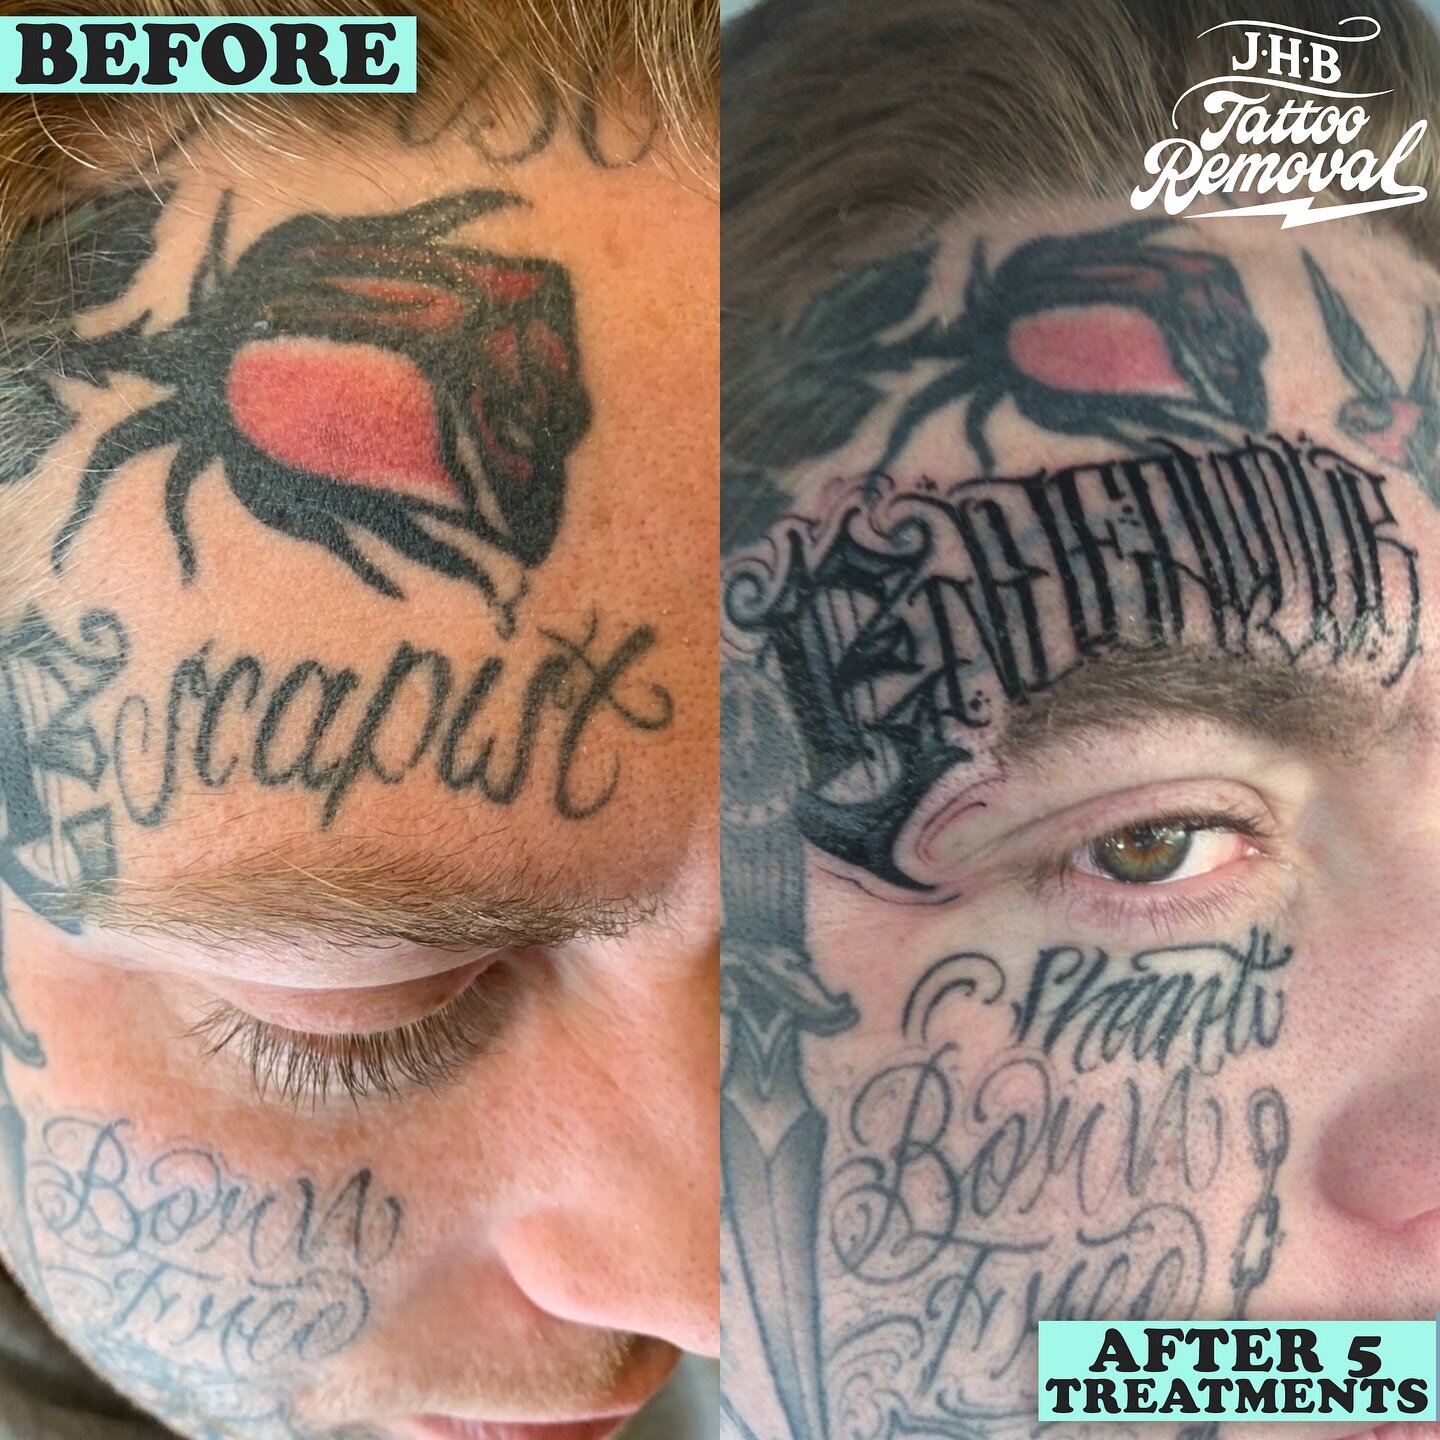 All covered and reworked for R! Thanks for choosing me again man! @pedro_tattoos did a great job aswell for the reworking of this! 

Nothing more nerve wracking than working on someone&rsquo;s face 😱 That skin has to be extra perfect at the end. We 